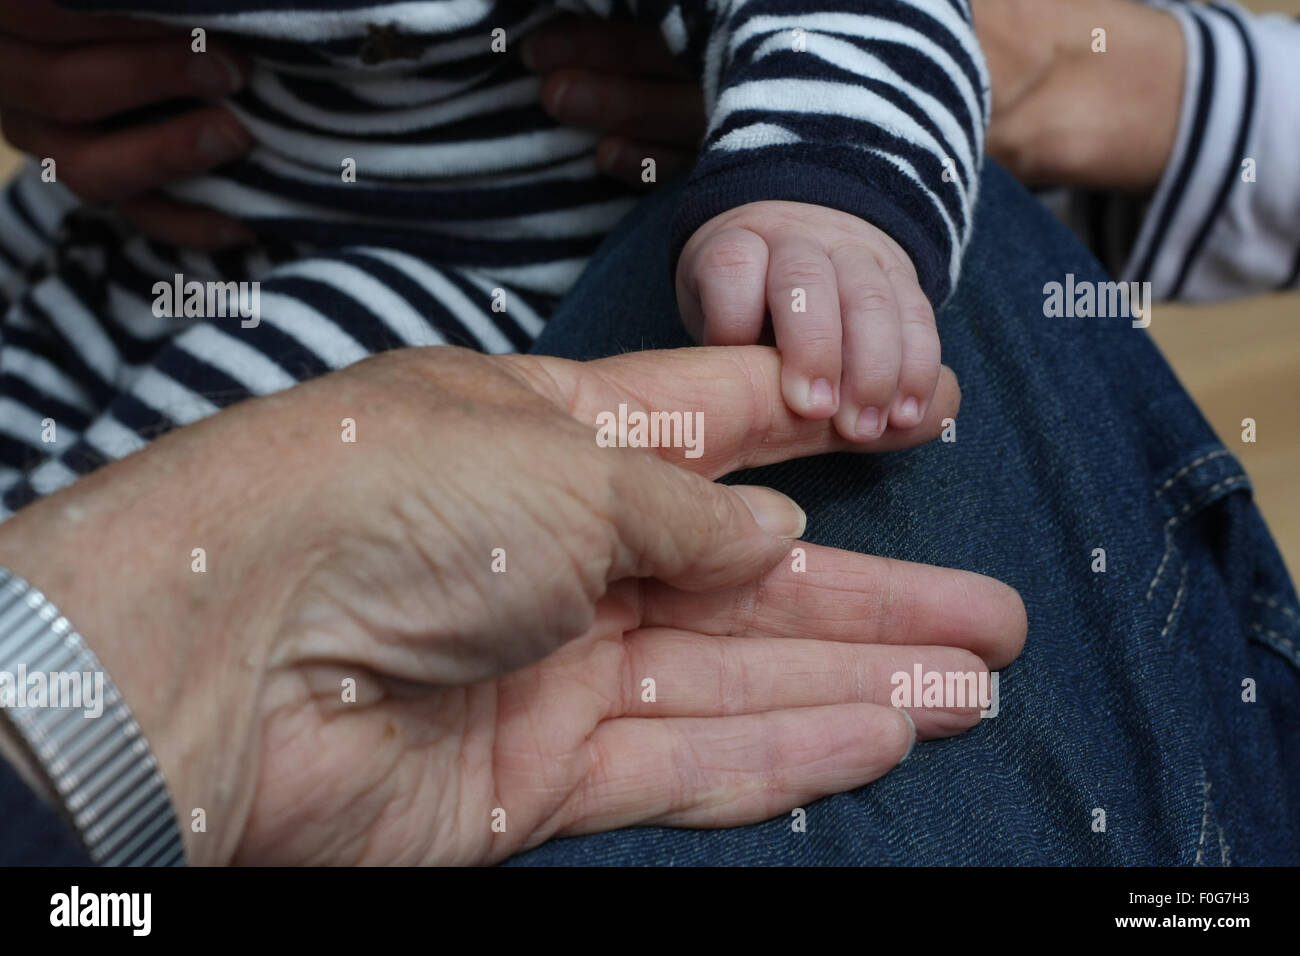 A baby baby holds an adult's hand Stock Photo